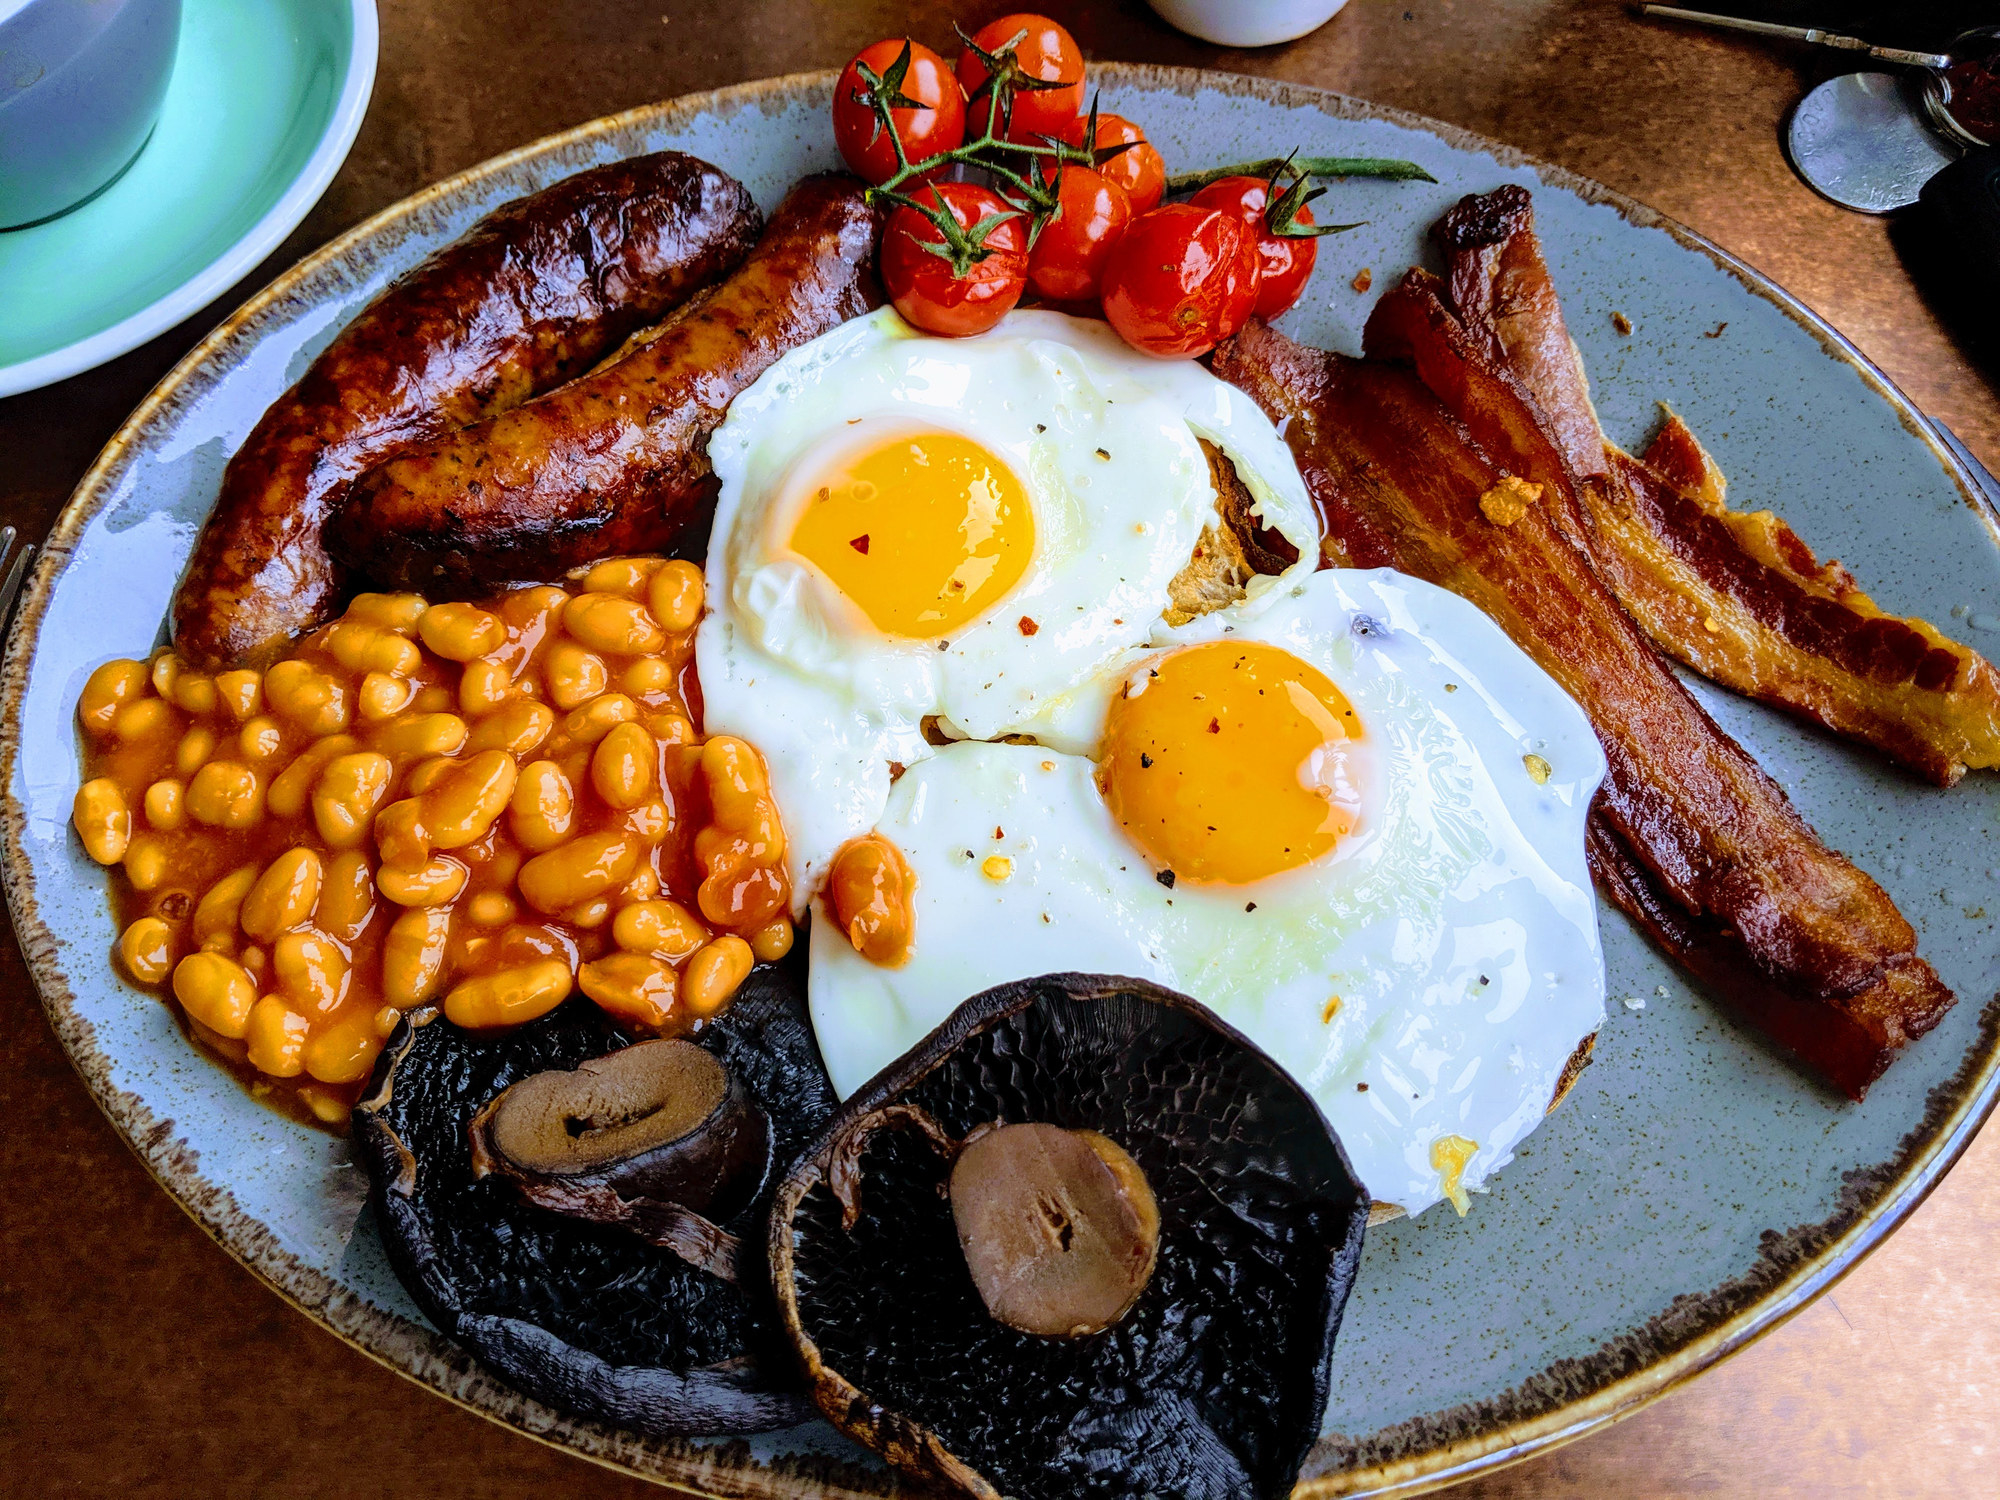 English breakfast with lots of meat and eggs.